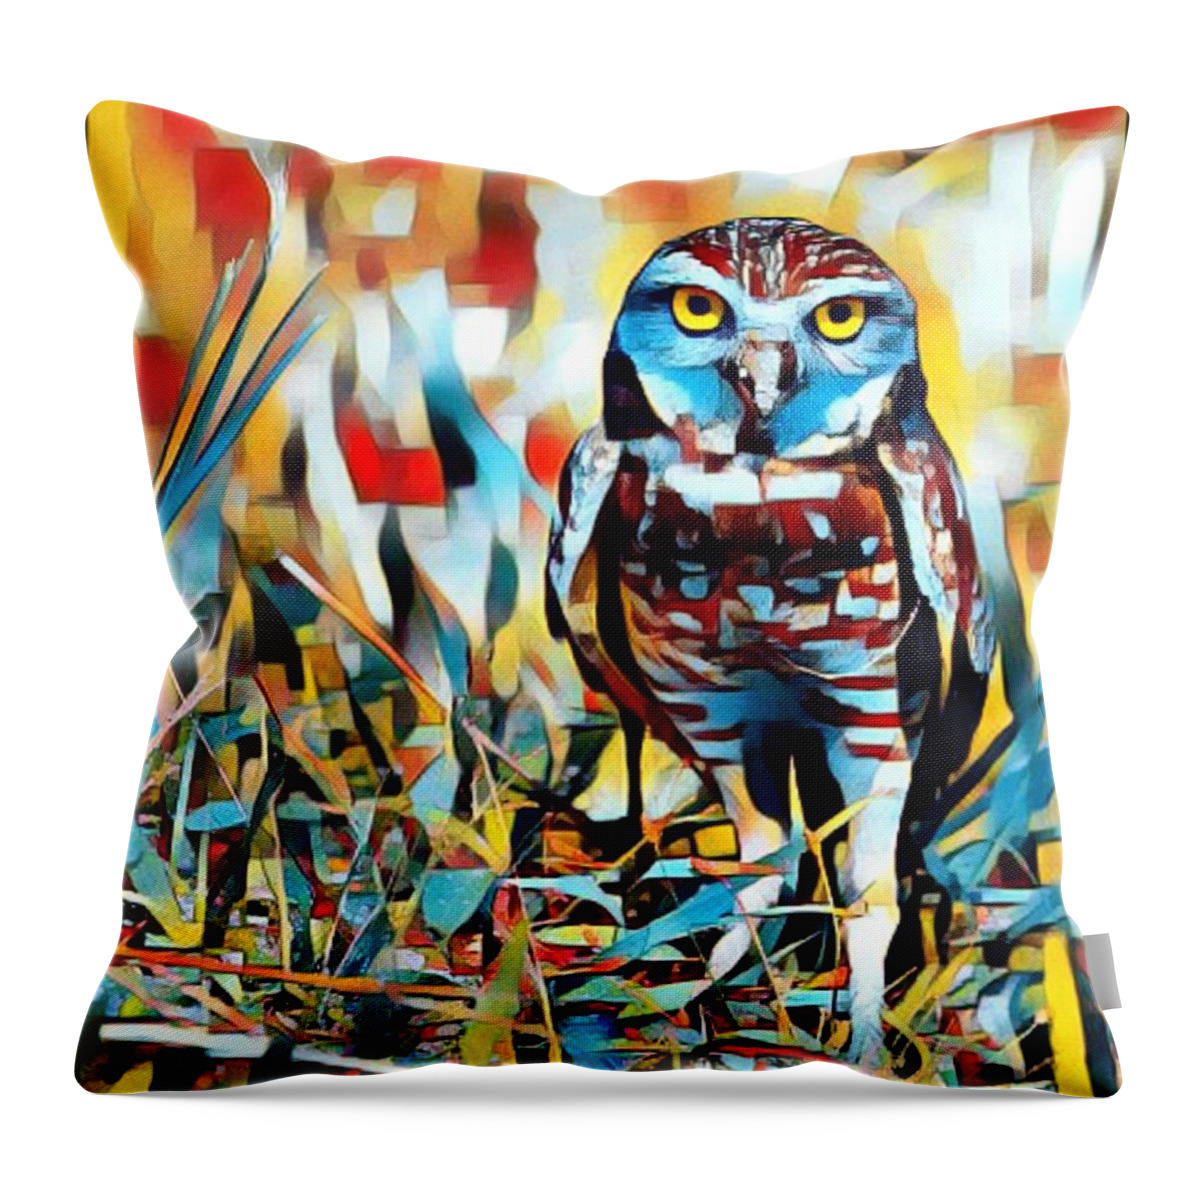 Owl Throw Pillow featuring the photograph Burrowing by Alison Belsan Horton